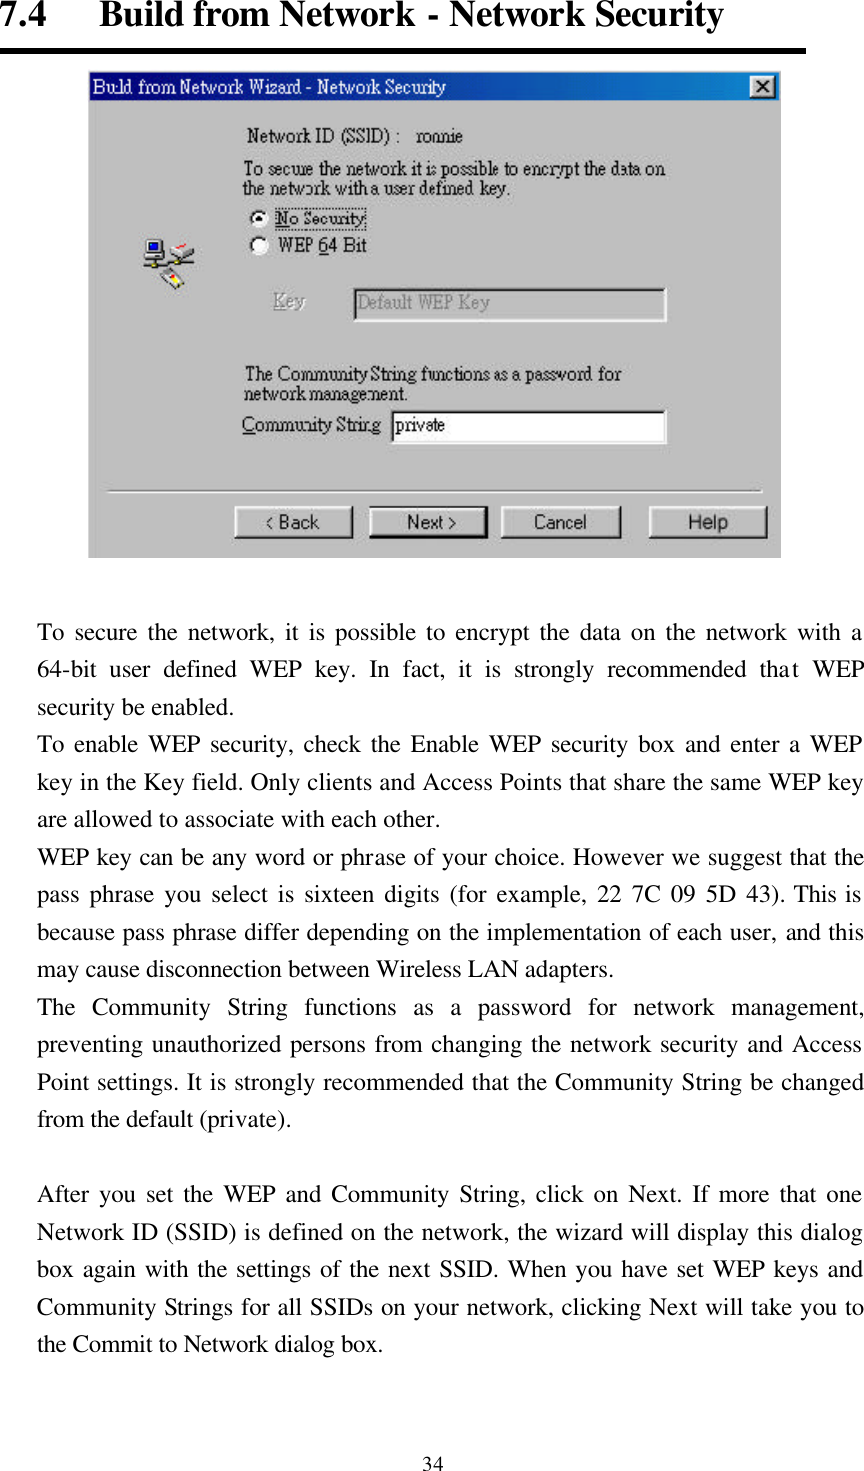  347.4   Build from Network - Network Security   To secure the network, it is possible to encrypt the data on the network with a 64-bit user defined WEP key. In fact, it is strongly recommended that WEP security be enabled.   To enable WEP security, check the Enable WEP security box and enter a WEP key in the Key field. Only clients and Access Points that share the same WEP key are allowed to associate with each other.   WEP key can be any word or phrase of your choice. However we suggest that the pass phrase you select is sixteen digits (for example, 22 7C 09 5D 43). This is because pass phrase differ depending on the implementation of each user, and this may cause disconnection between Wireless LAN adapters.   The Community String functions as a password for network management, preventing unauthorized persons from changing the network security and Access Point settings. It is strongly recommended that the Community String be changed from the default (private).    After you set the WEP and Community String, click on Next. If more that one Network ID (SSID) is defined on the network, the wizard will display this dialog box again with the settings of the next SSID. When you have set WEP keys and Community Strings for all SSIDs on your network, clicking Next will take you to the Commit to Network dialog box.  